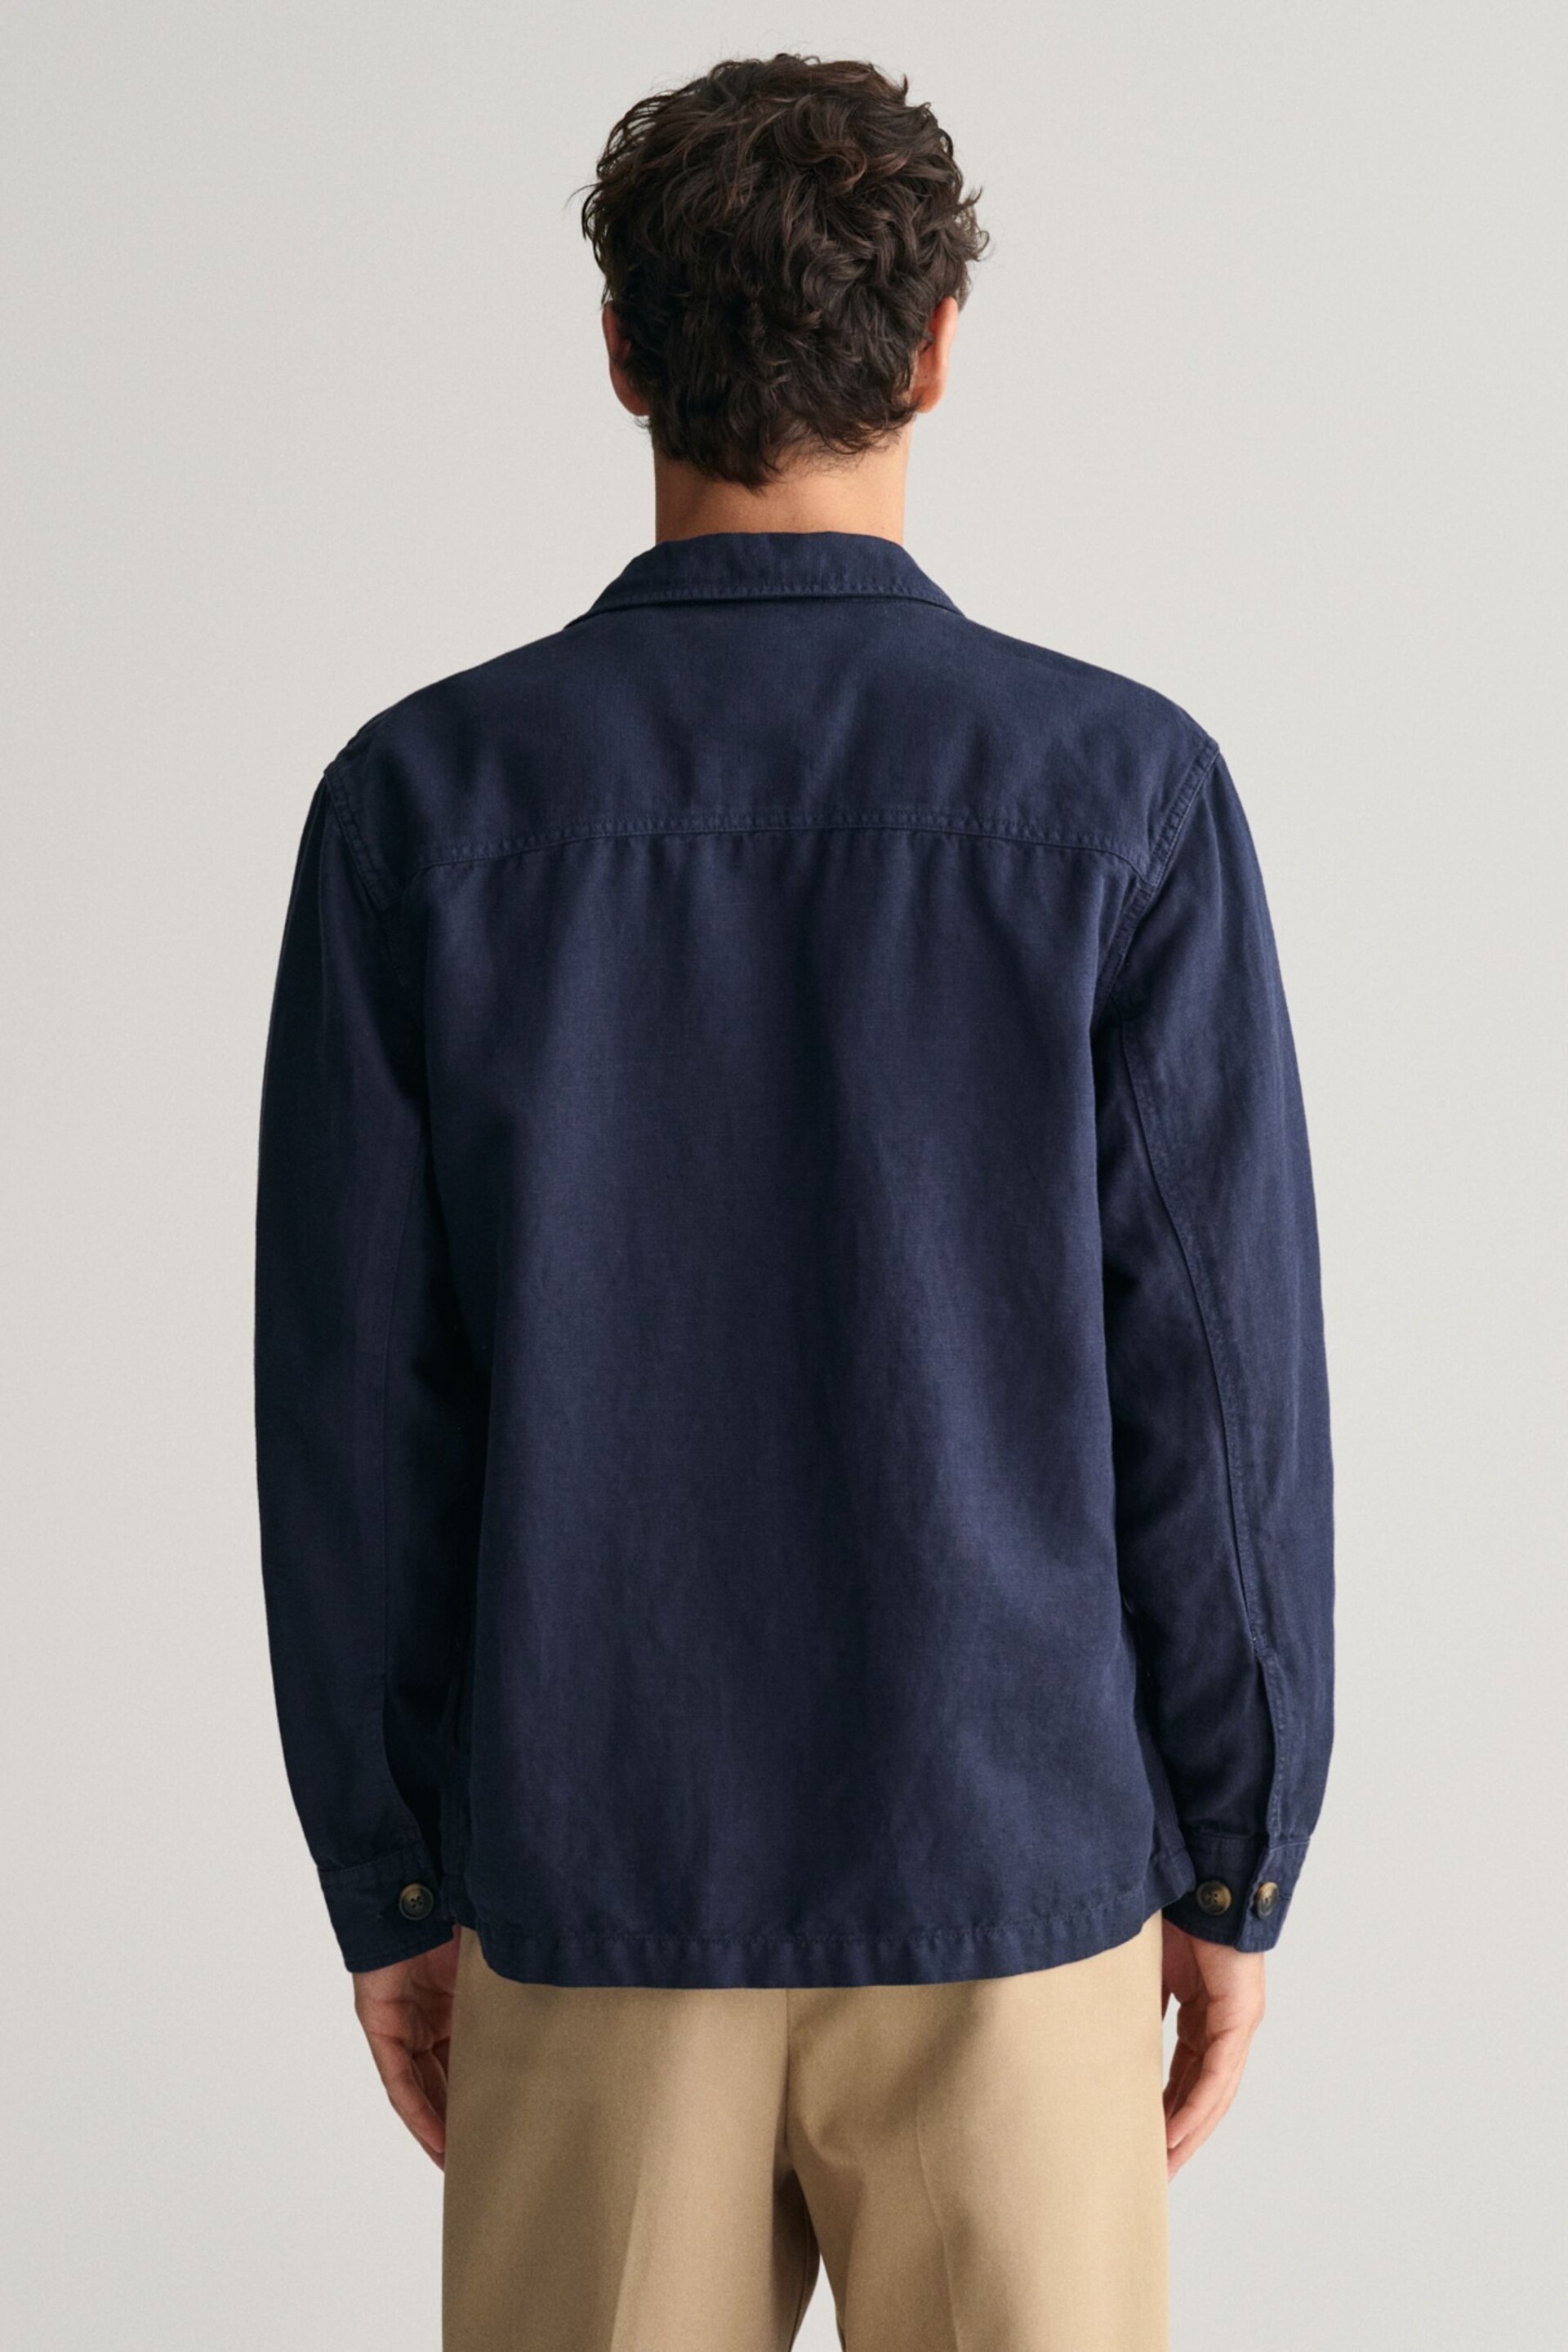 GANT Relaxed Fit Cotton Linen Twill Overshirt - Image 2 of 7